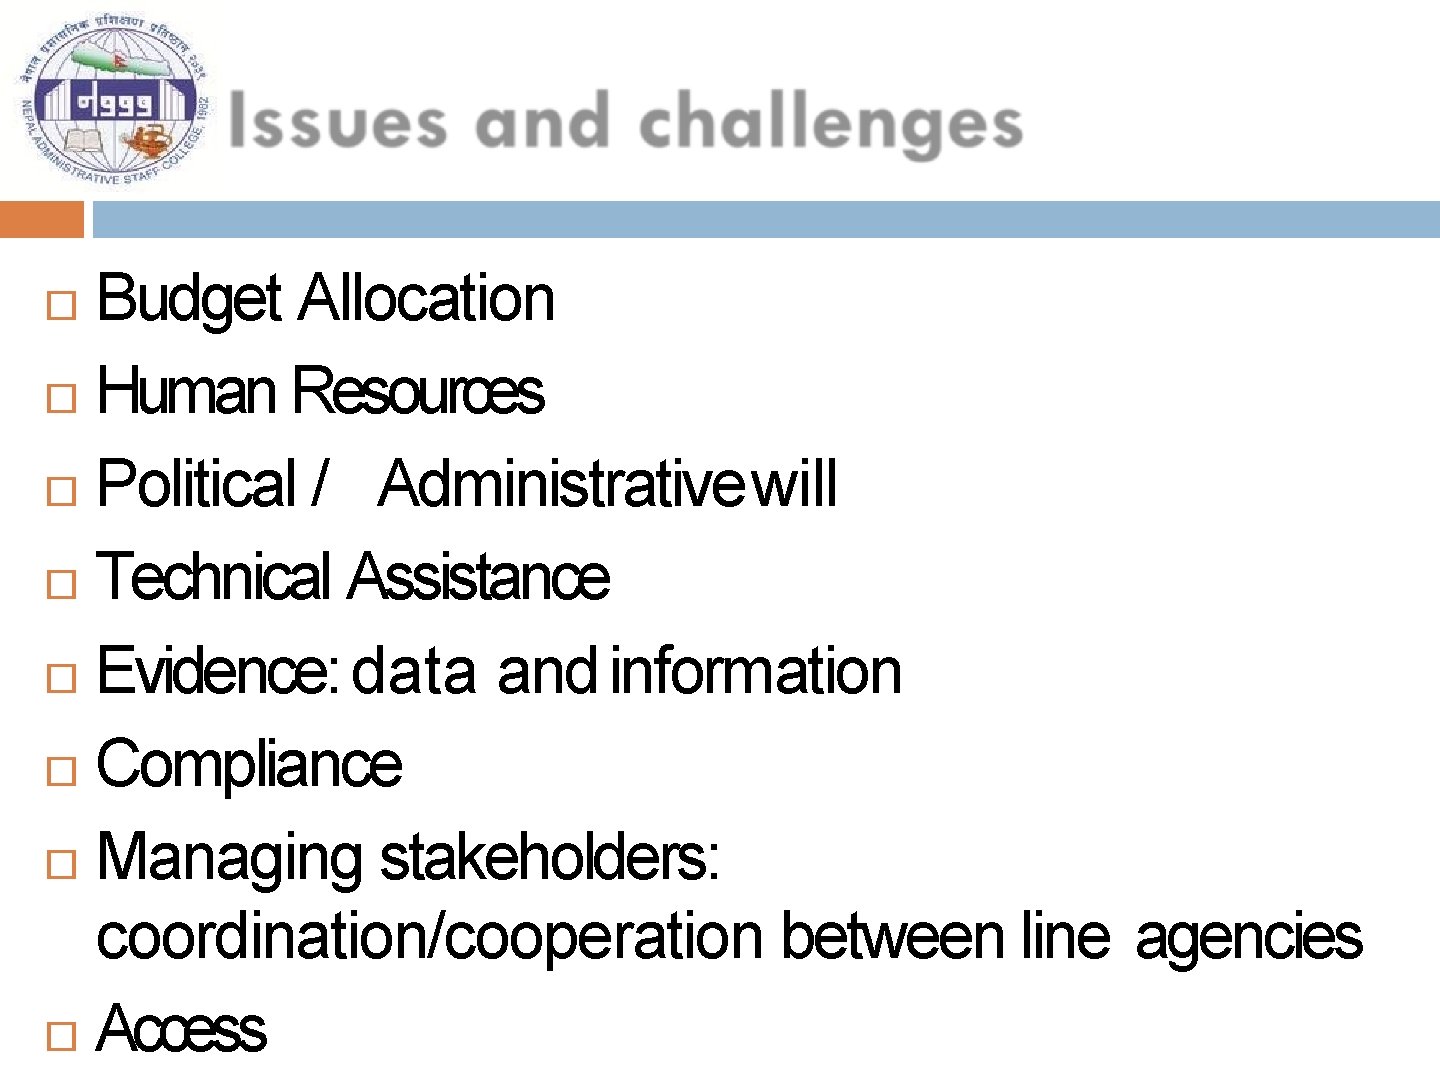 Budget Allocation Human Resources Political / Administrative will Technical Assistance Evidence: data and information